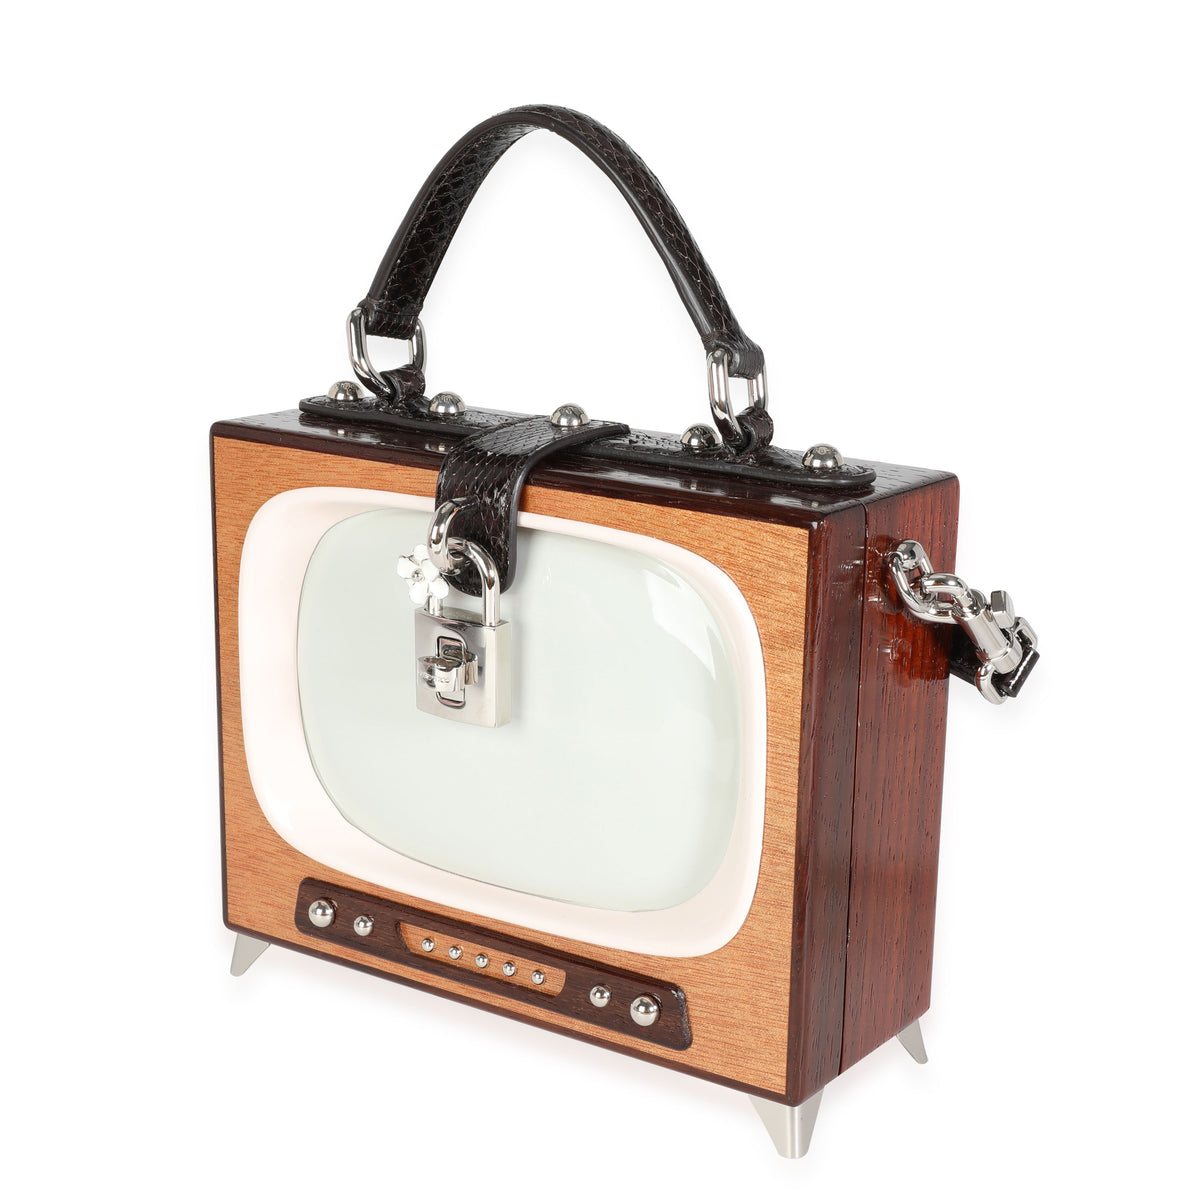 Hand Painted Wooden TV Box Bag with Snakeskin Strap